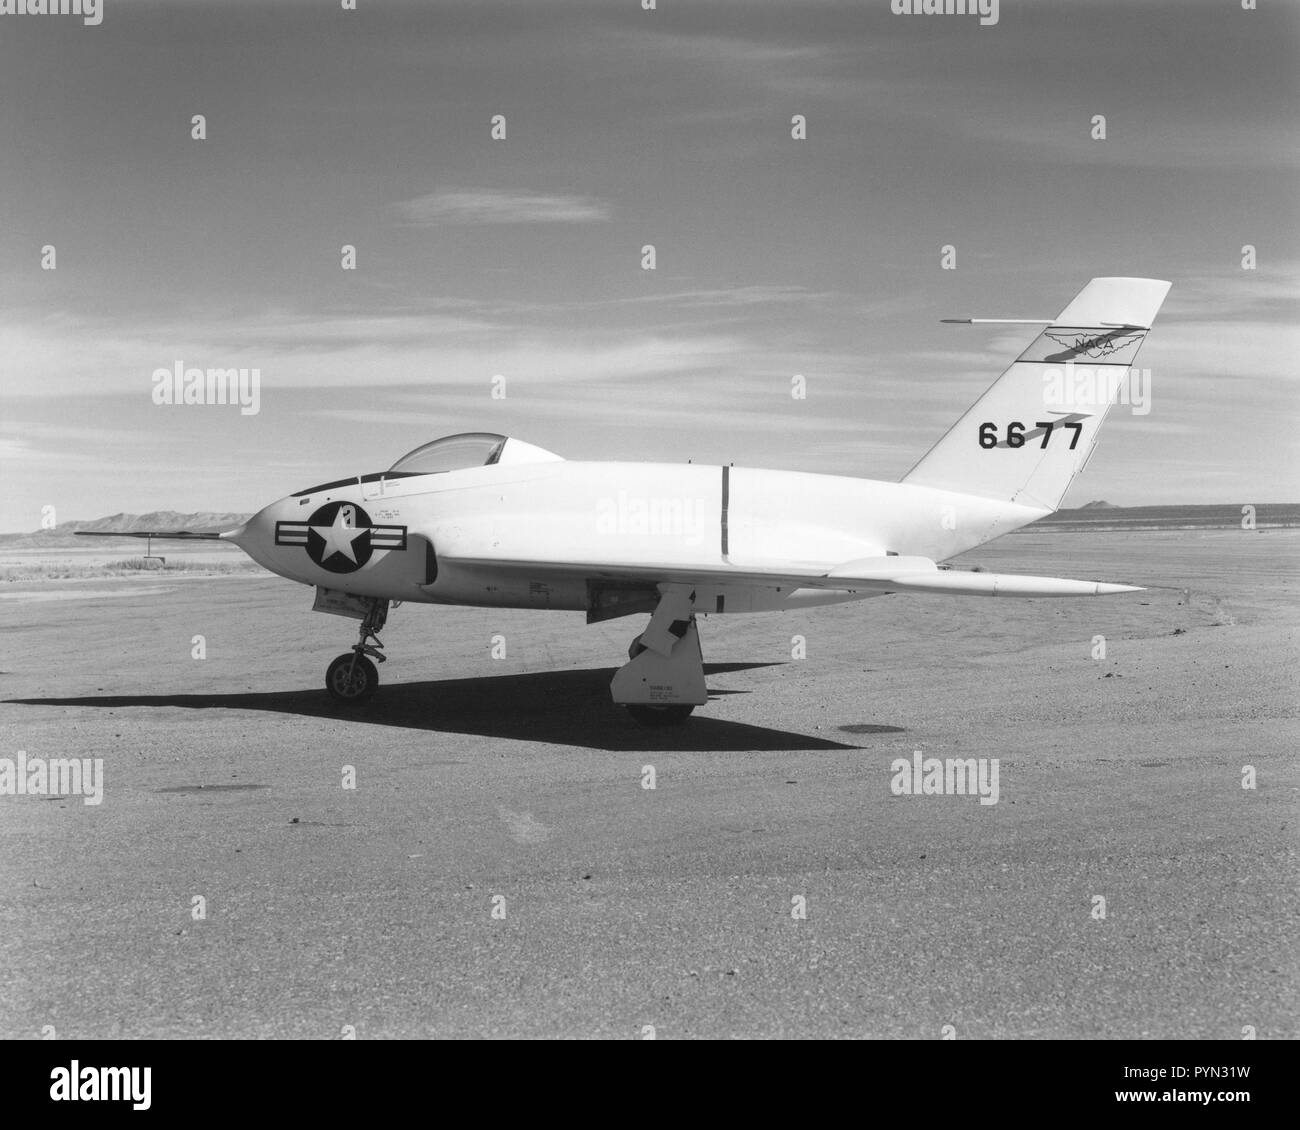 In this 1950 view of the left side of the NACA High-Speed Flight Research Station's X-4 research aircraft, the low swept wing and horizontal taillest design are seen. Stock Photo